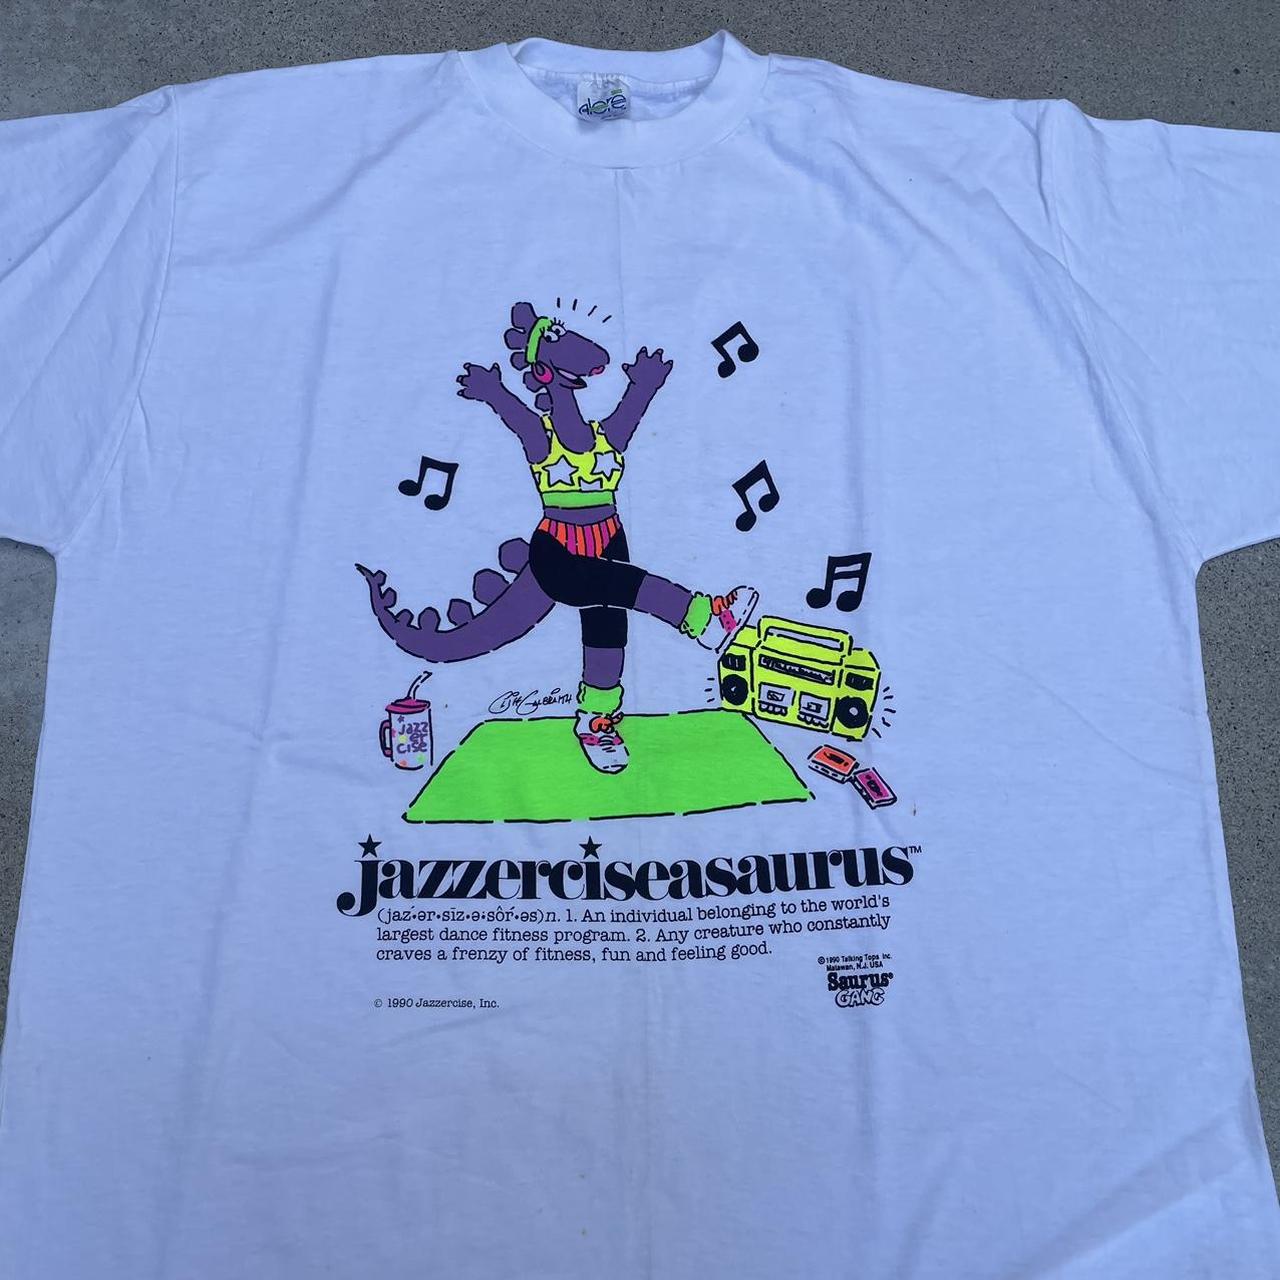 Vintage Jazzercise Tshirt This is a great heavy - Depop